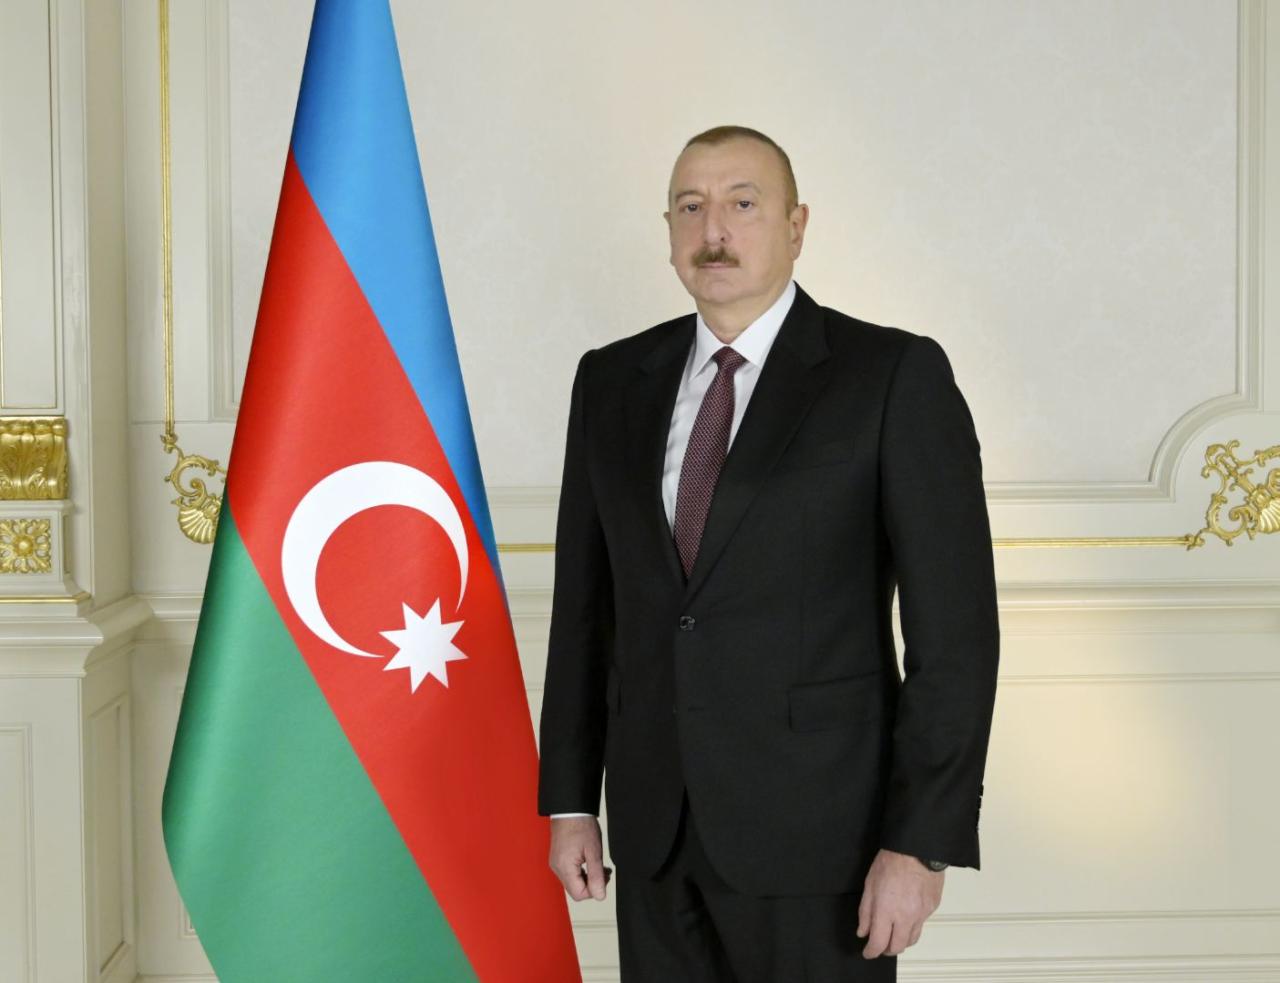 President Aliyev shares publication on occasion of National Flag Day [PHOTO]